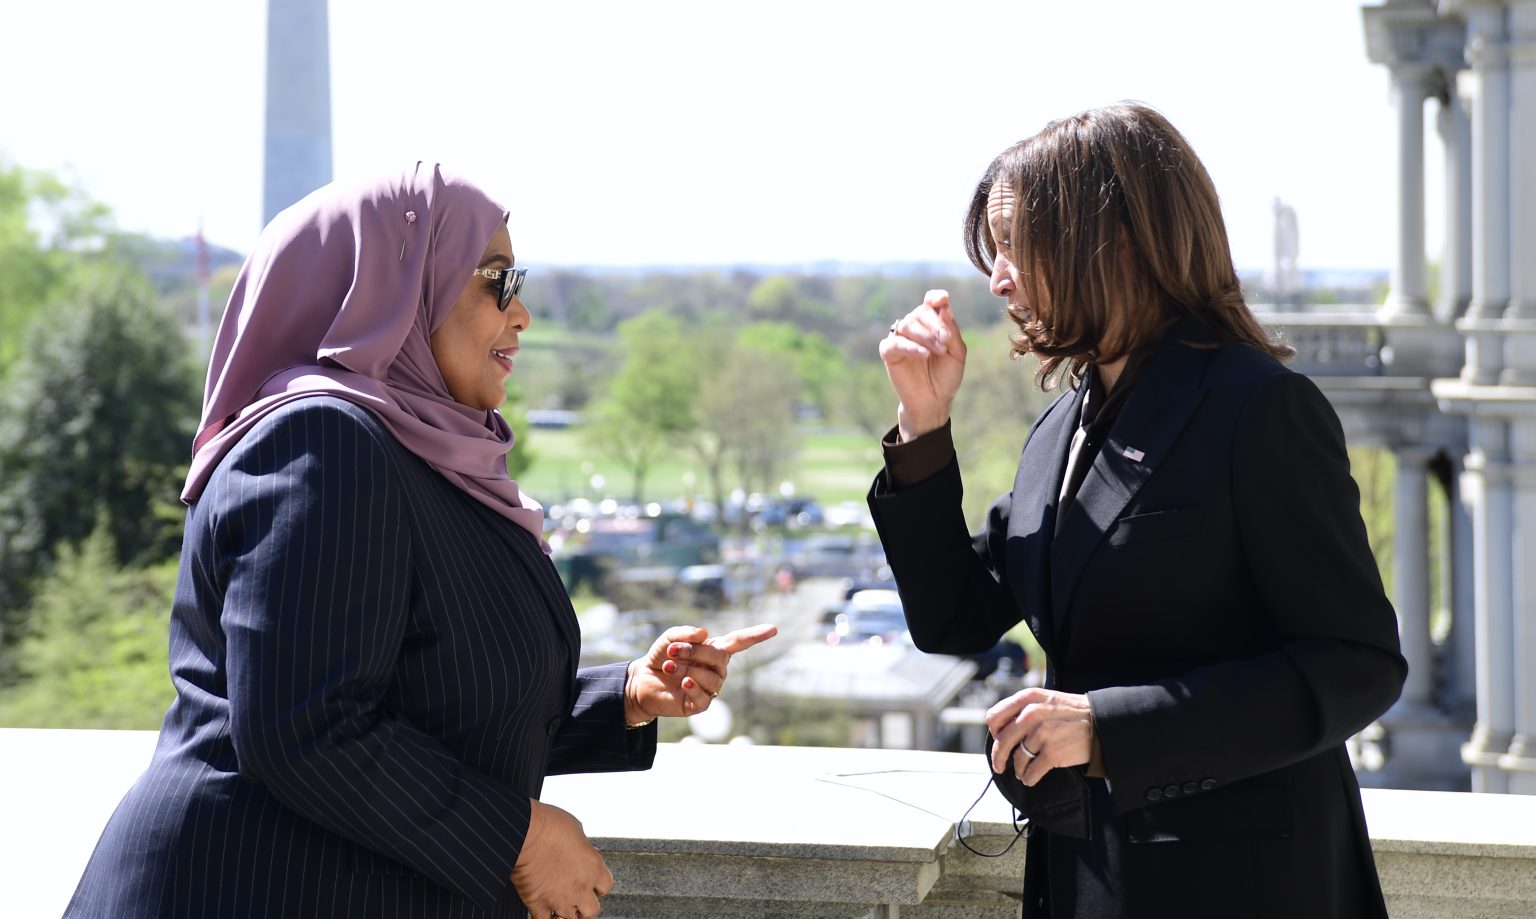 Tanzania's President Samia Suluhu Hassan with United States Vice President Kamala Harris. Americans investing in Tanzania stand to gain from a US$1 billion investment opportunity in Tanzania. www.theexchange.africa